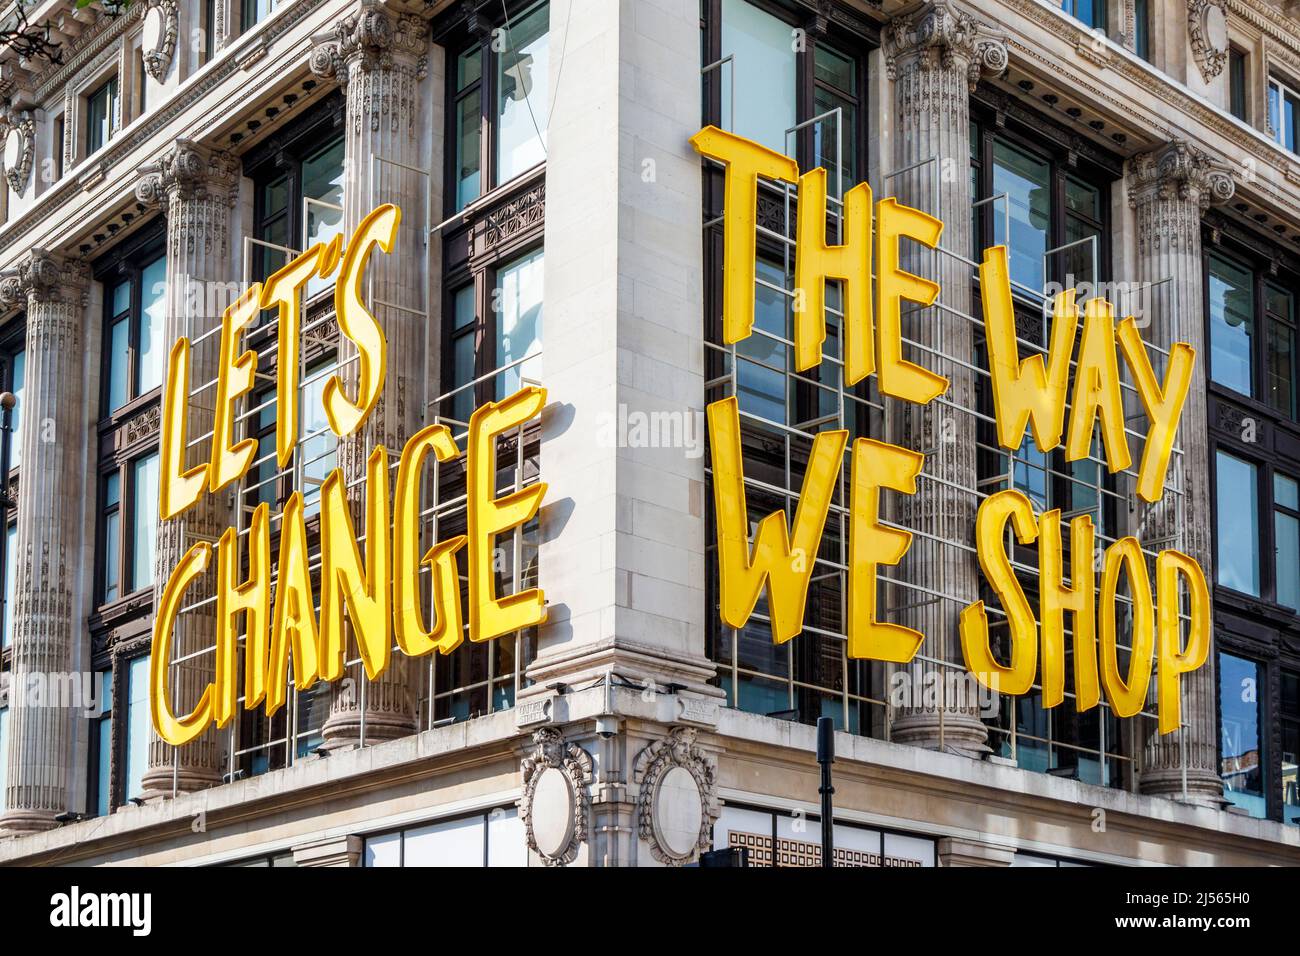 A sign on the corner of the Selfridges store in Oxford Street with the phrase 'Let's Change The Way We Shop', London, UK Stock Photo